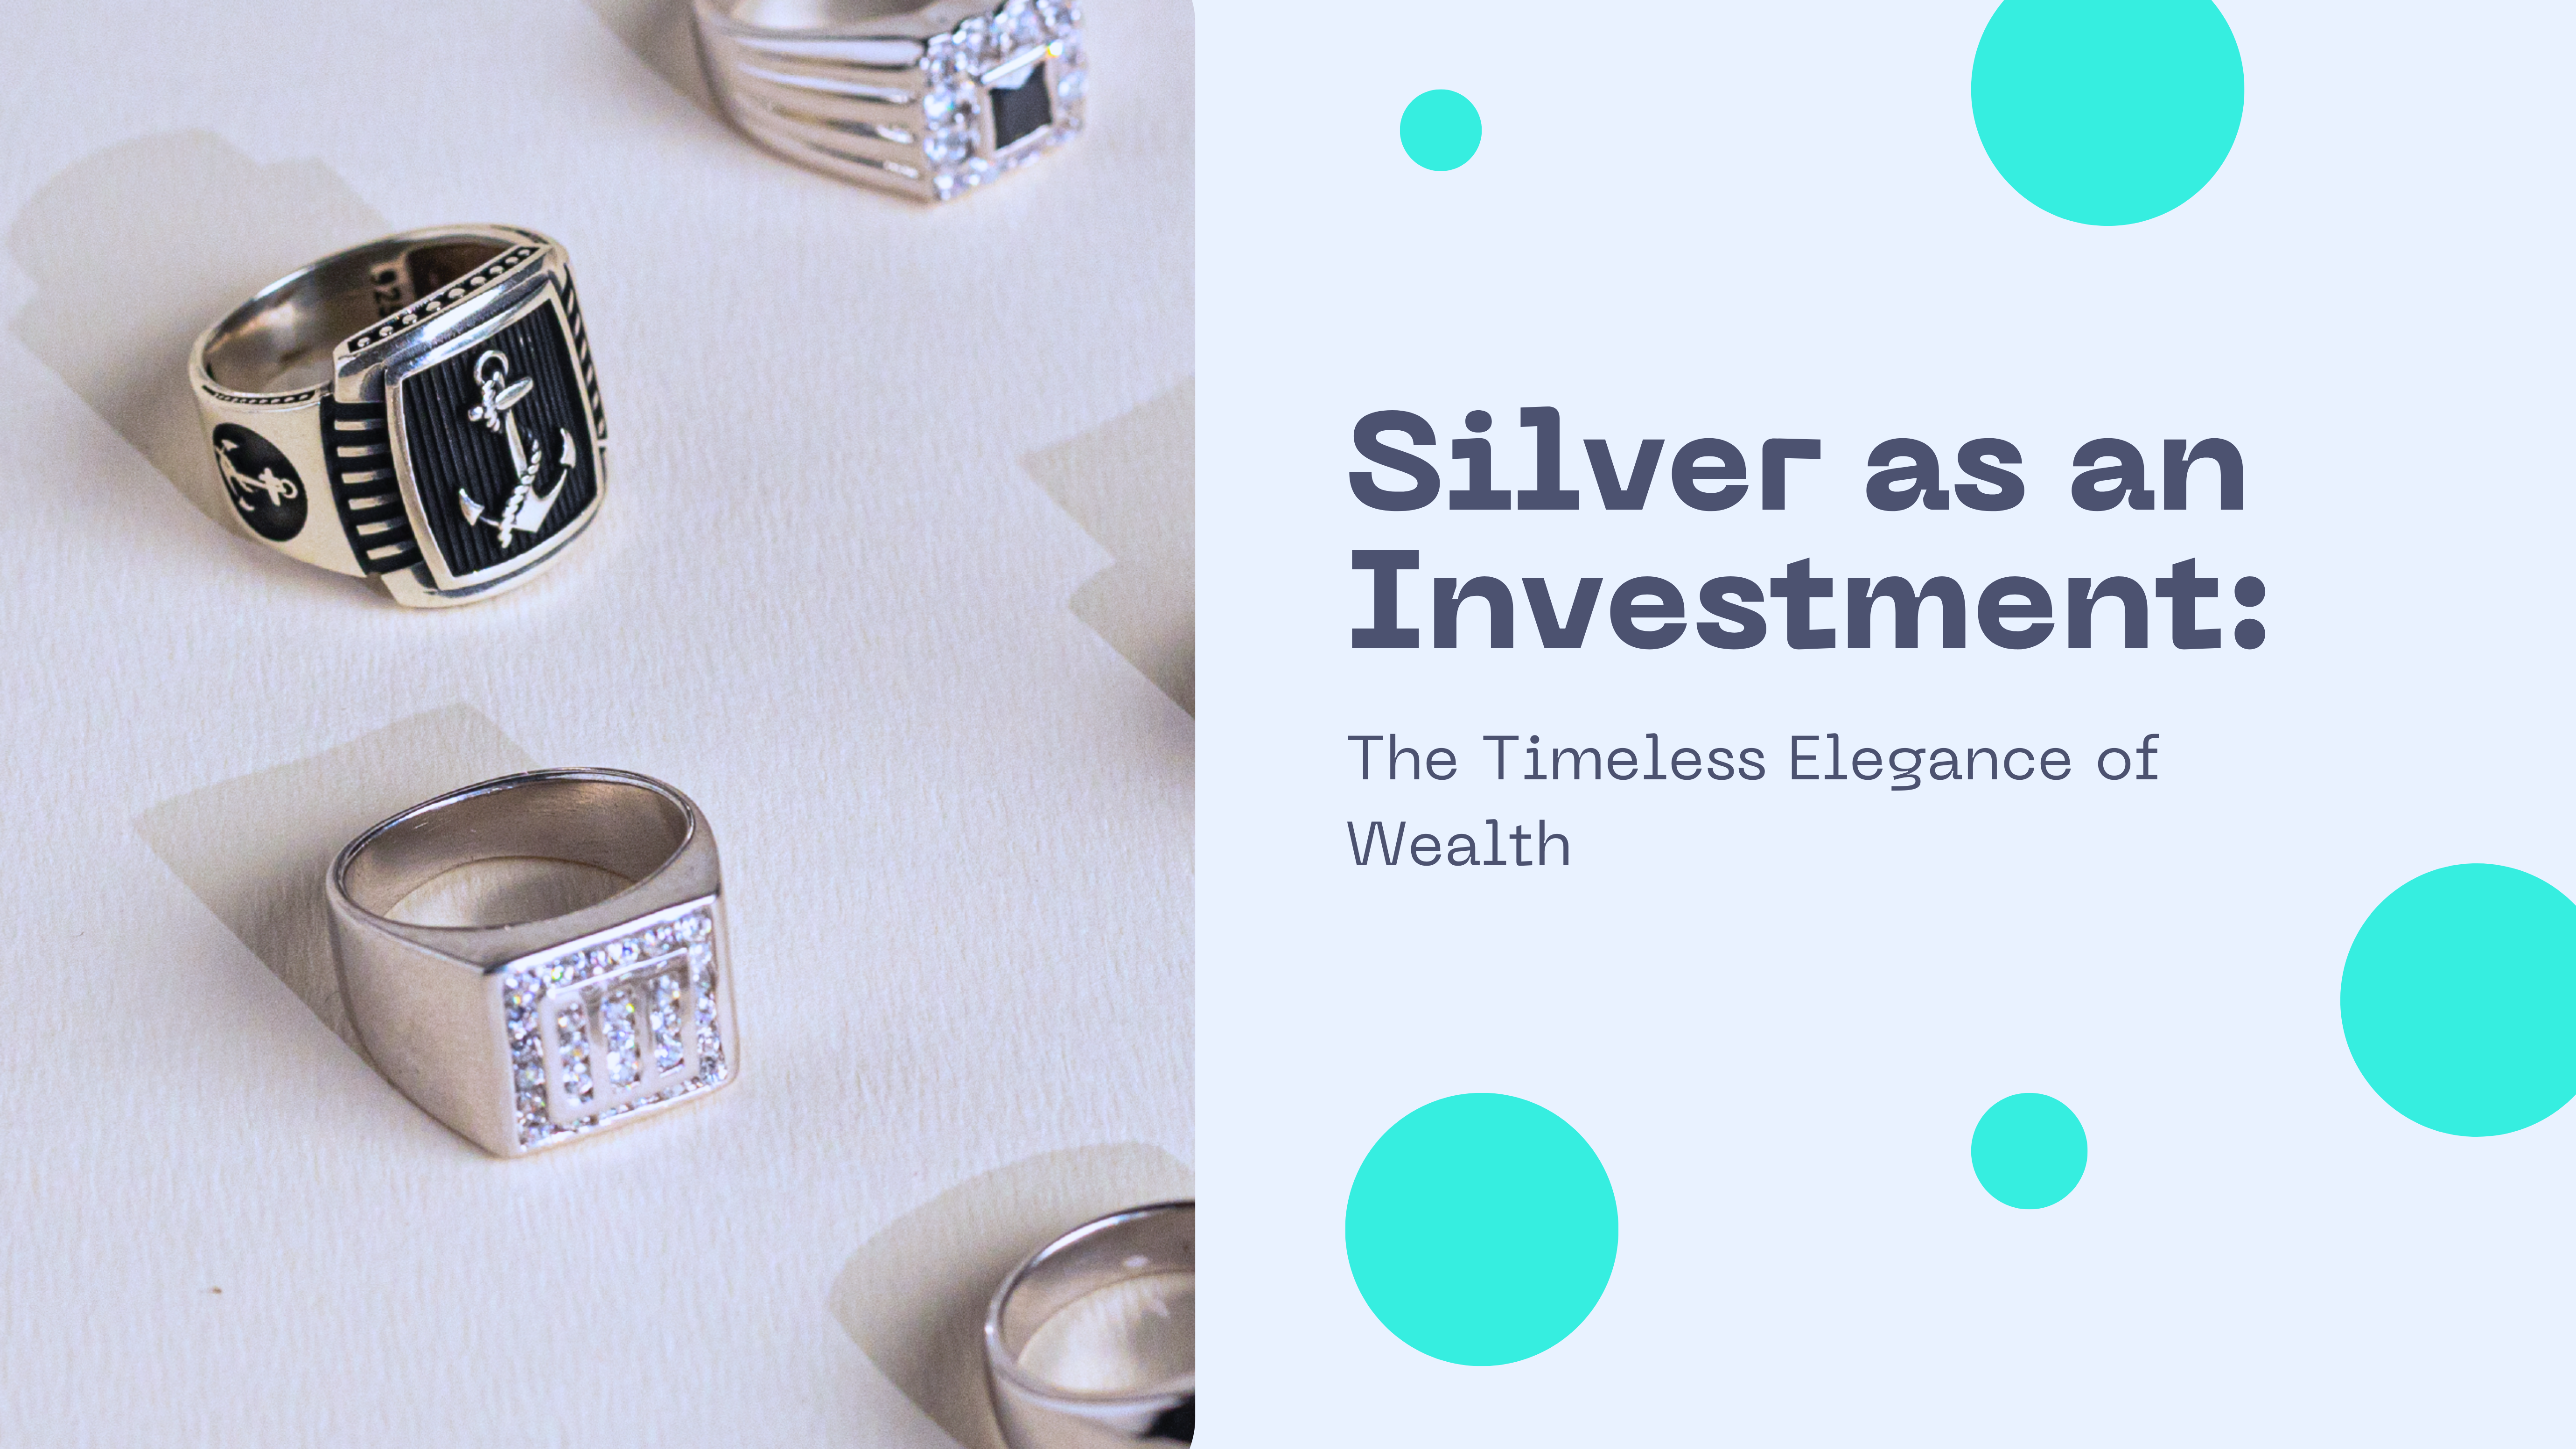 Silver as an Investment: The Timeless Elegance of Wealth